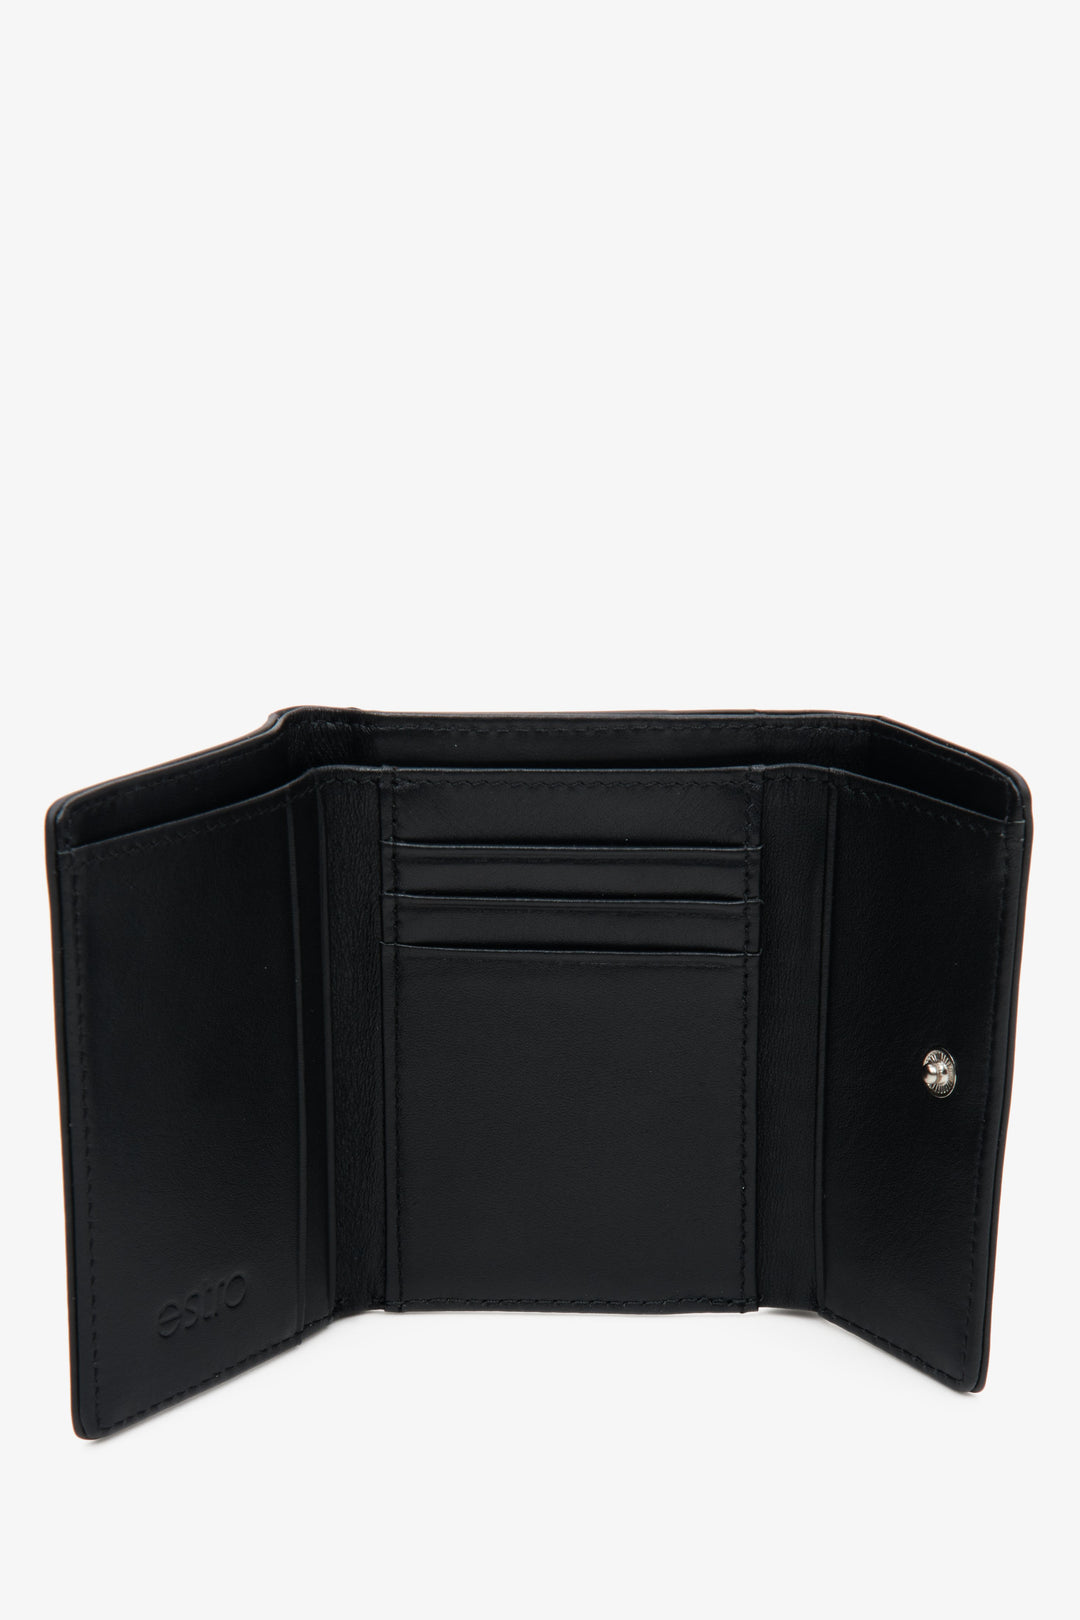 Women's tri-fold wallet made of genuine leather in black color - interior view of the model.